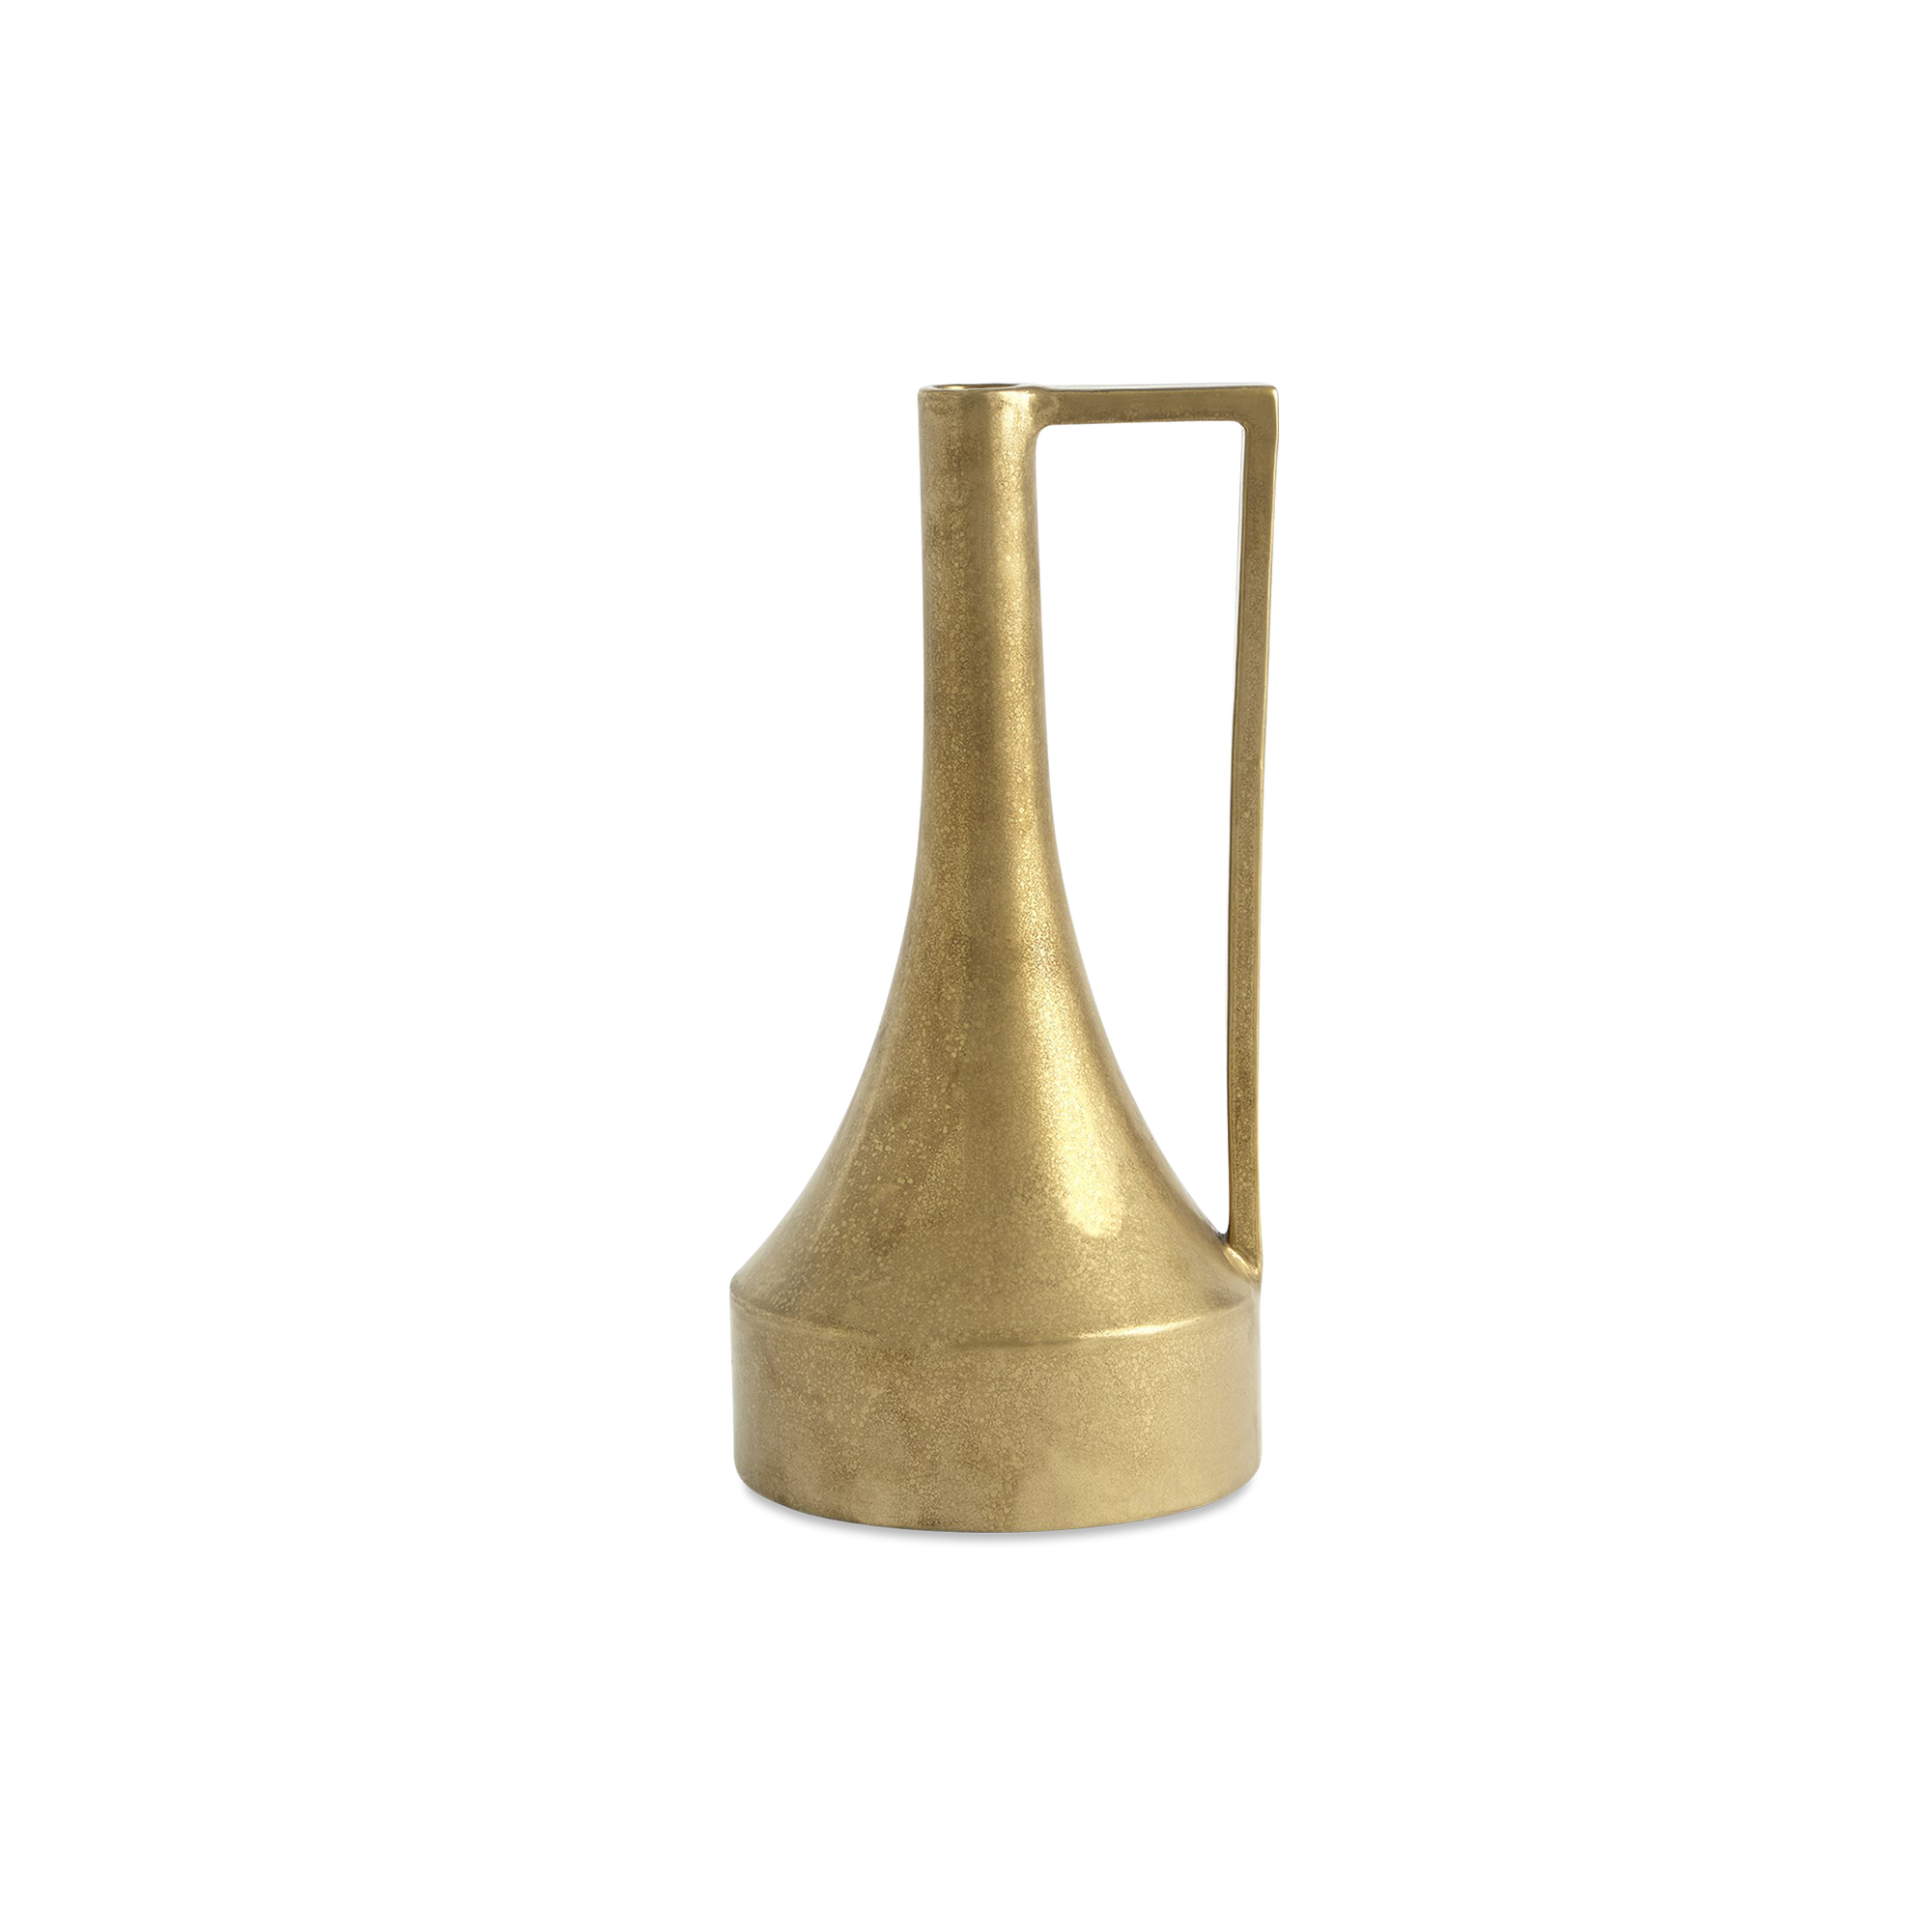 Reminiscent of Roman amphoras used to transport water, The Long Neck Handle Vase is ceramic with a mould-formed base and a hand-applied handle.